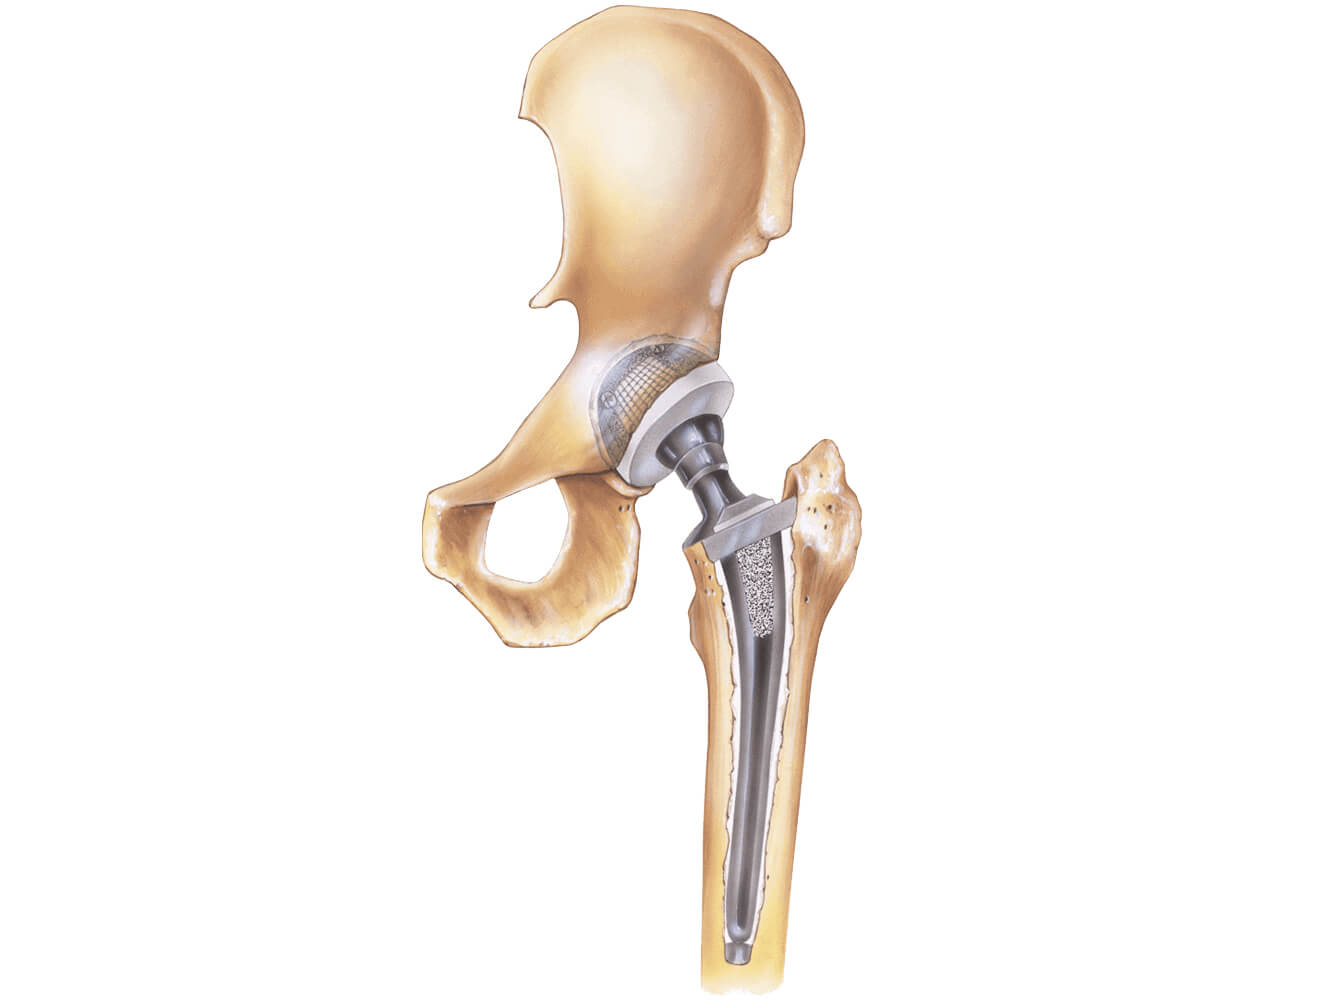 Hip Replacement  Procedure, Symptoms, Types of Implants and Risks